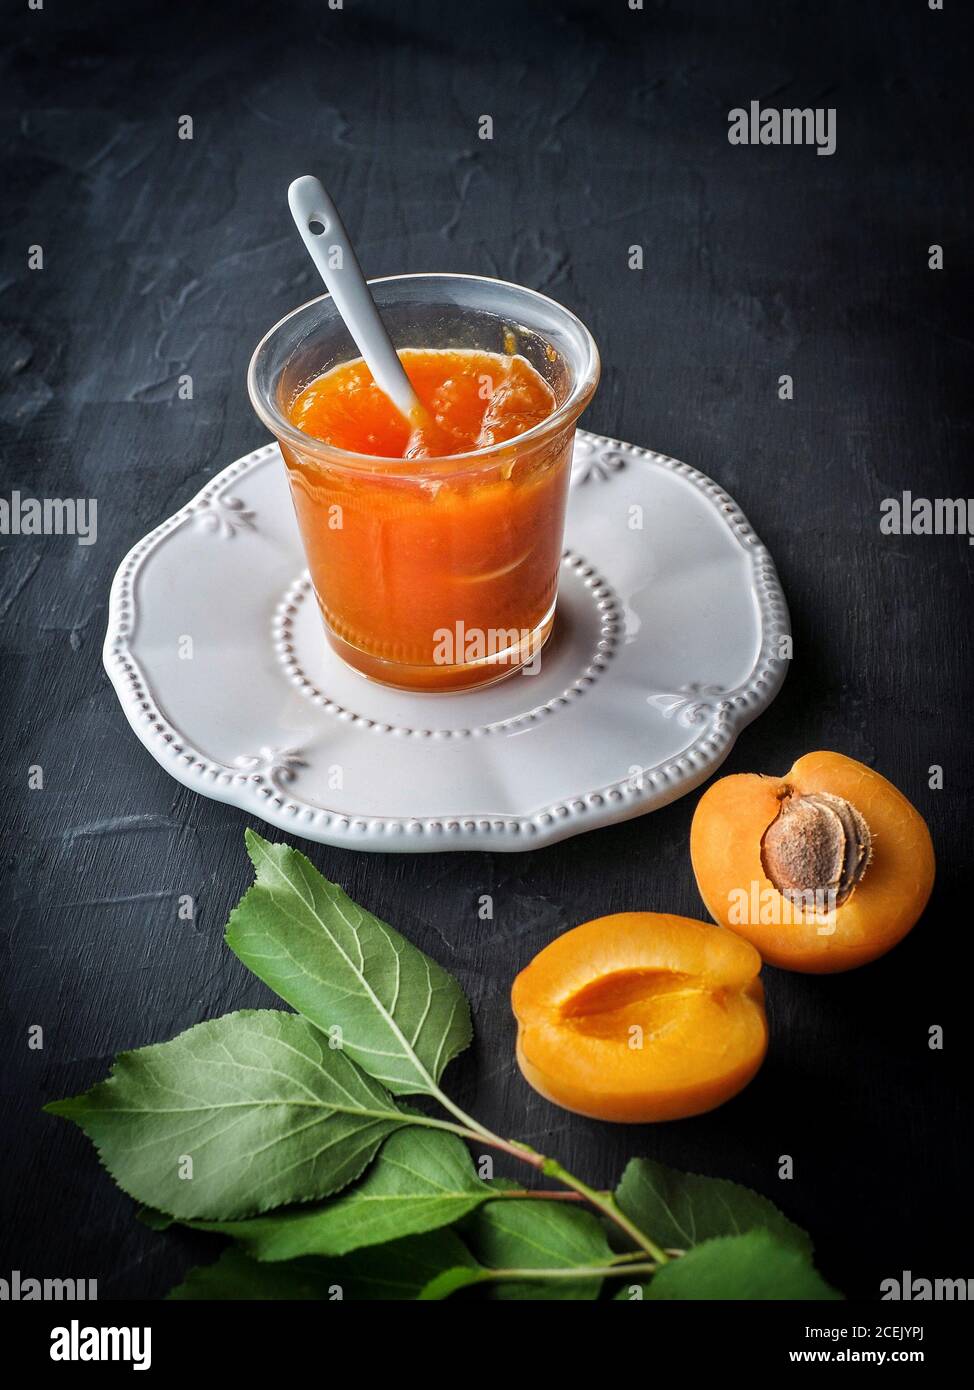 Fresh apricot cut in half with apricot jam on dark background. Dark food photo with copy space. Stock Photo